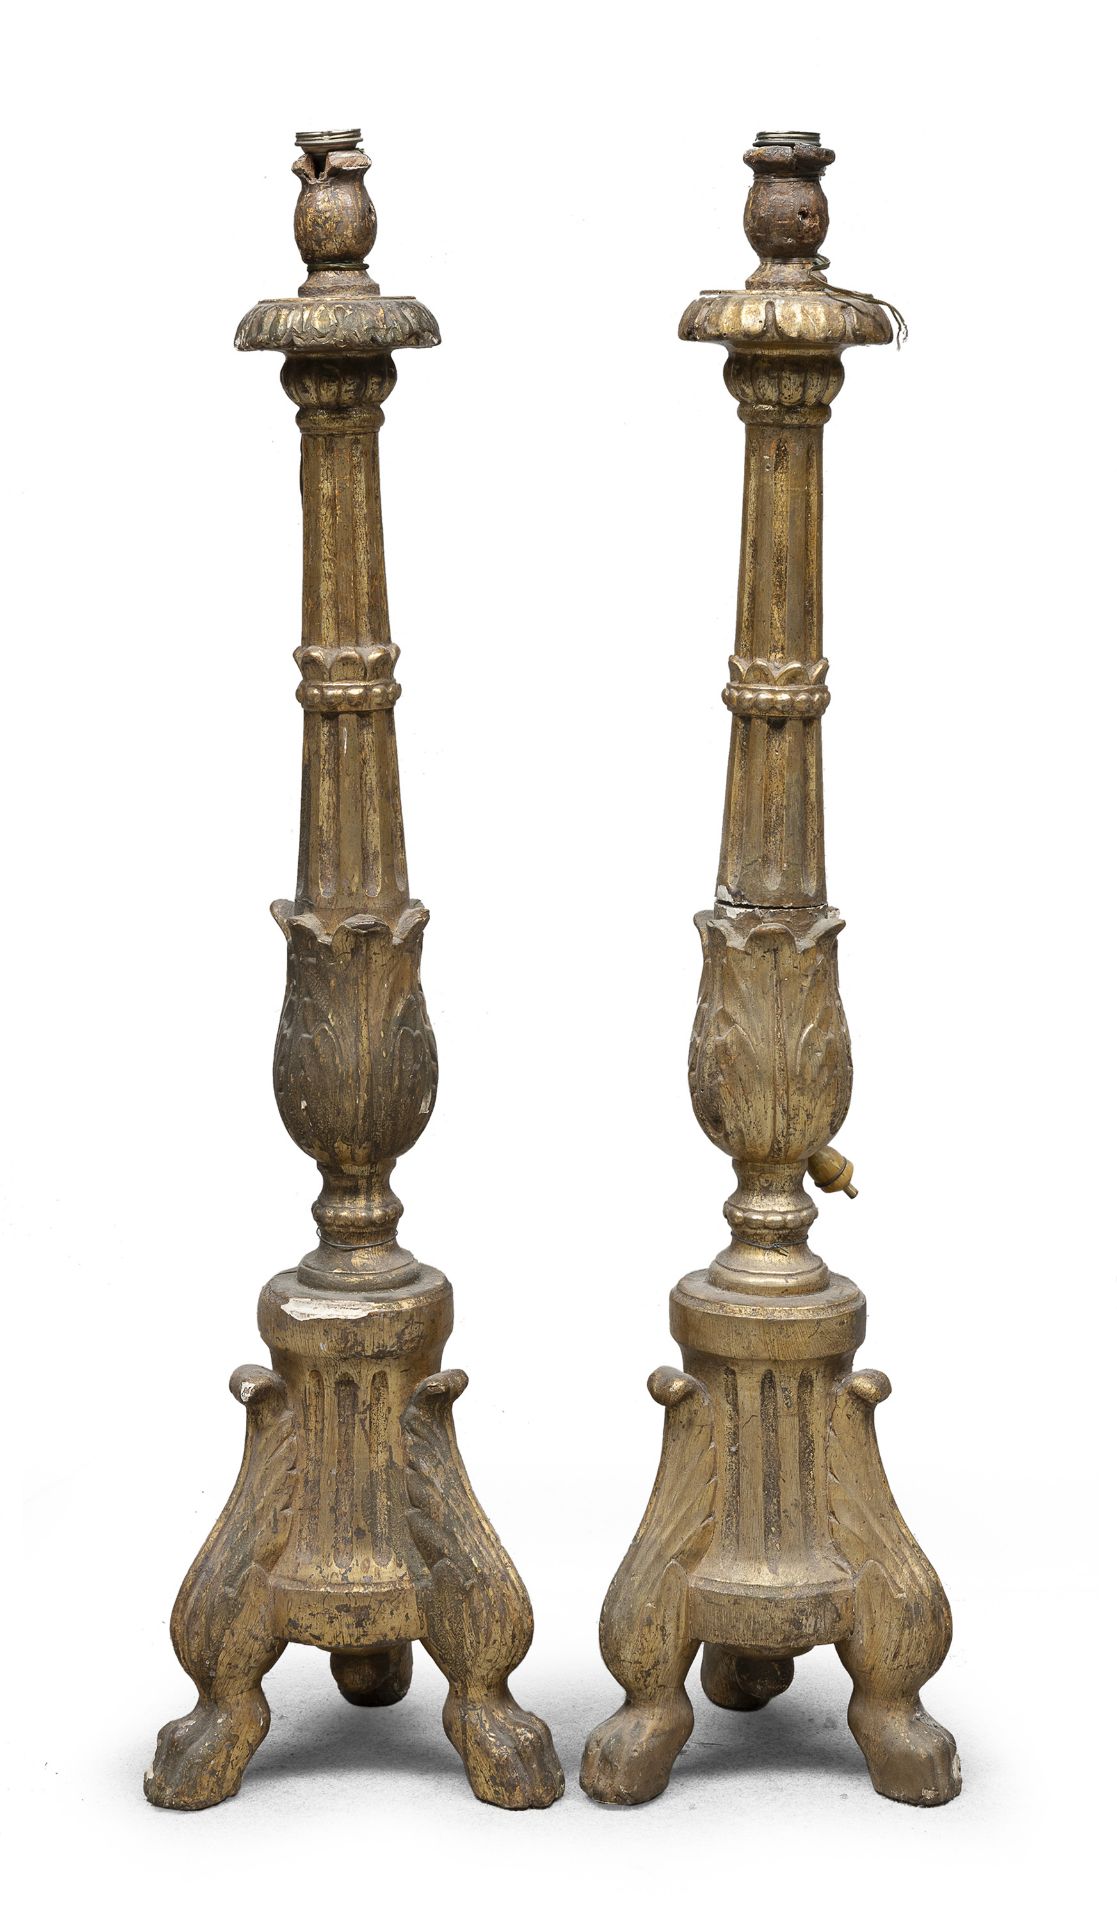 PAIR OF GILTWOOD CANDLESTICKS 18TH CENTURY